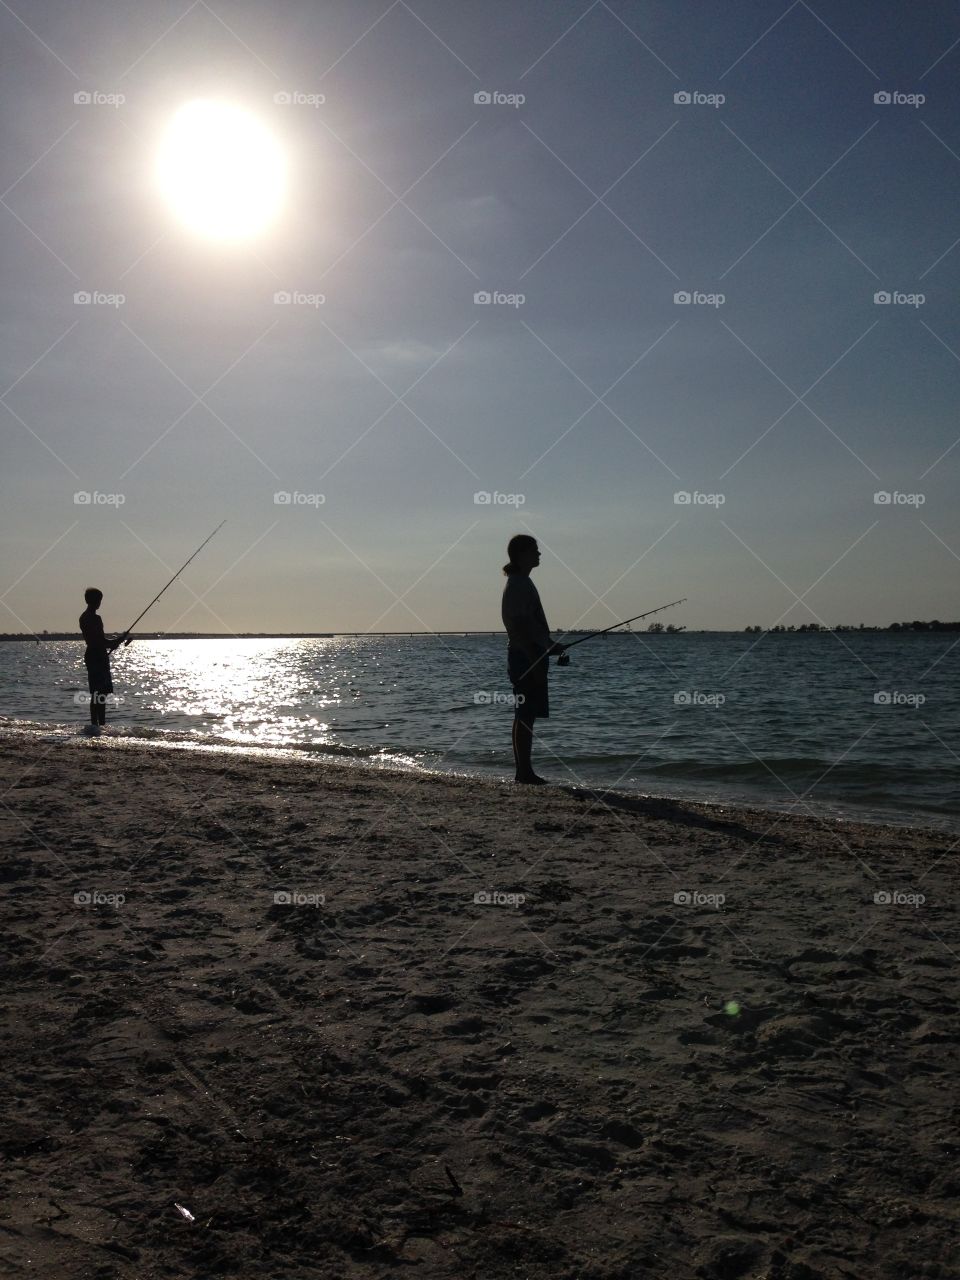 Brothers fishing 